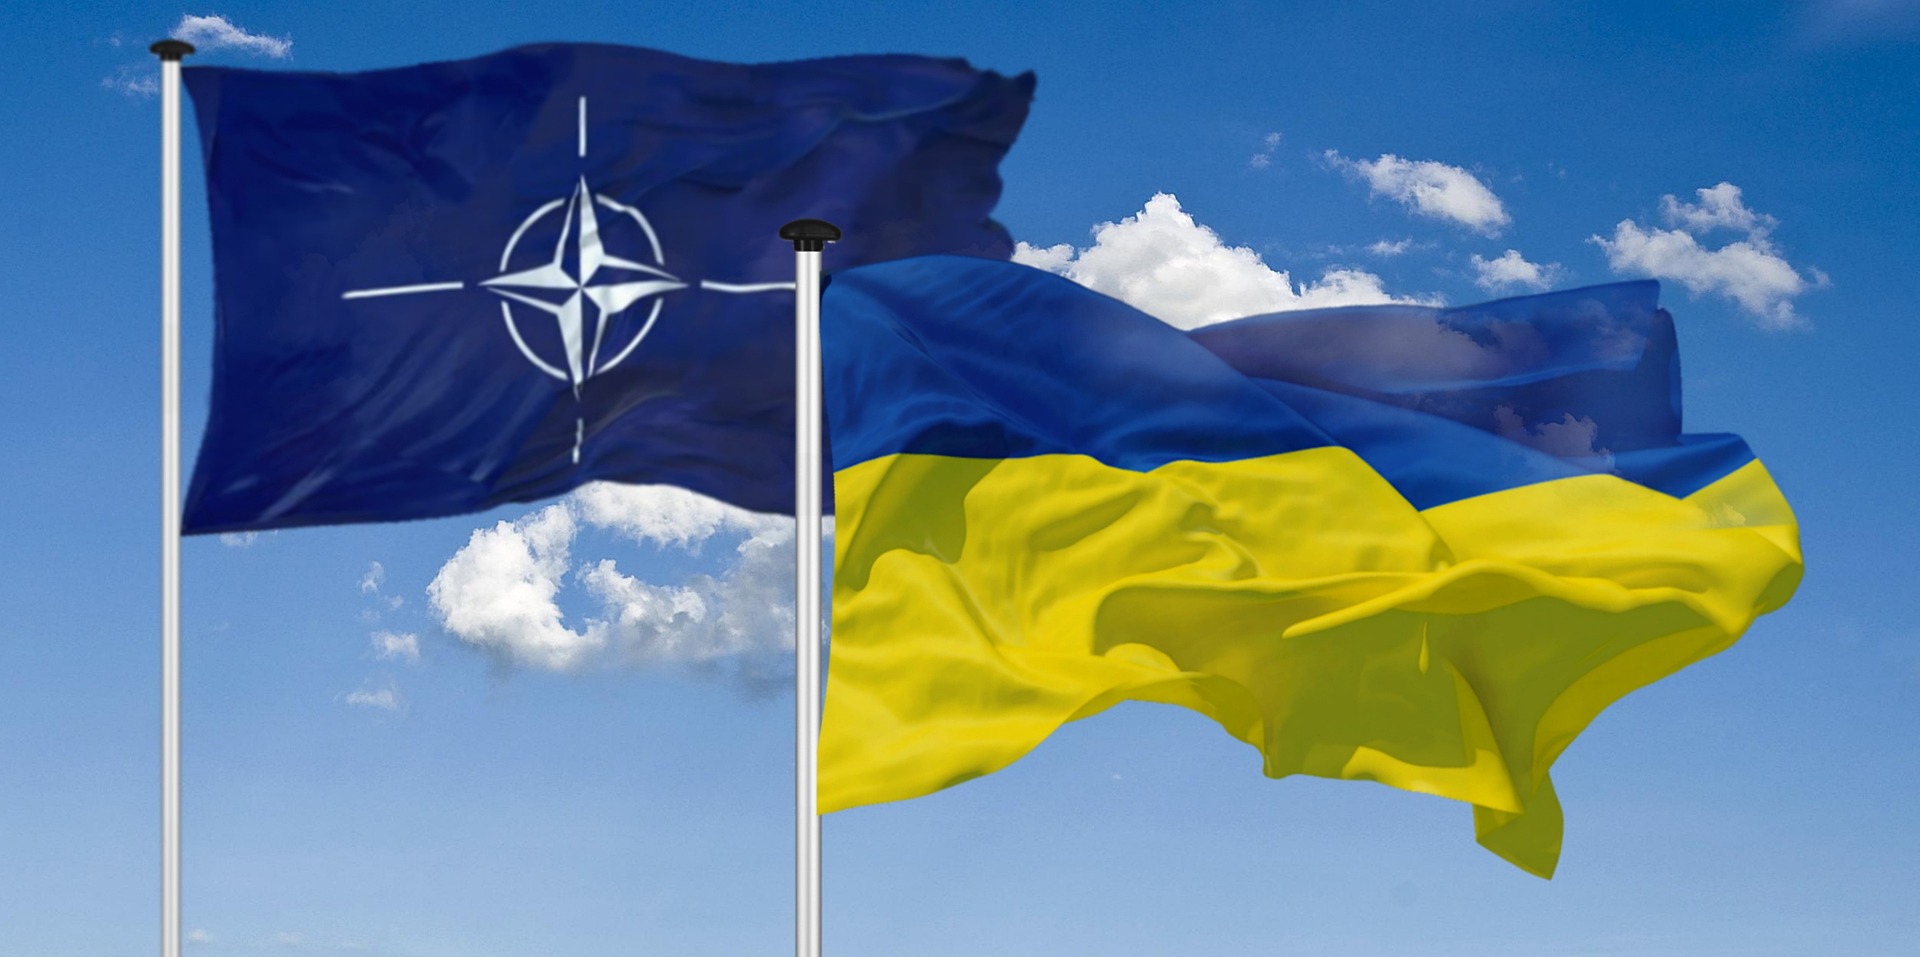 NATO Expansion: A Threat to Russia’s Security